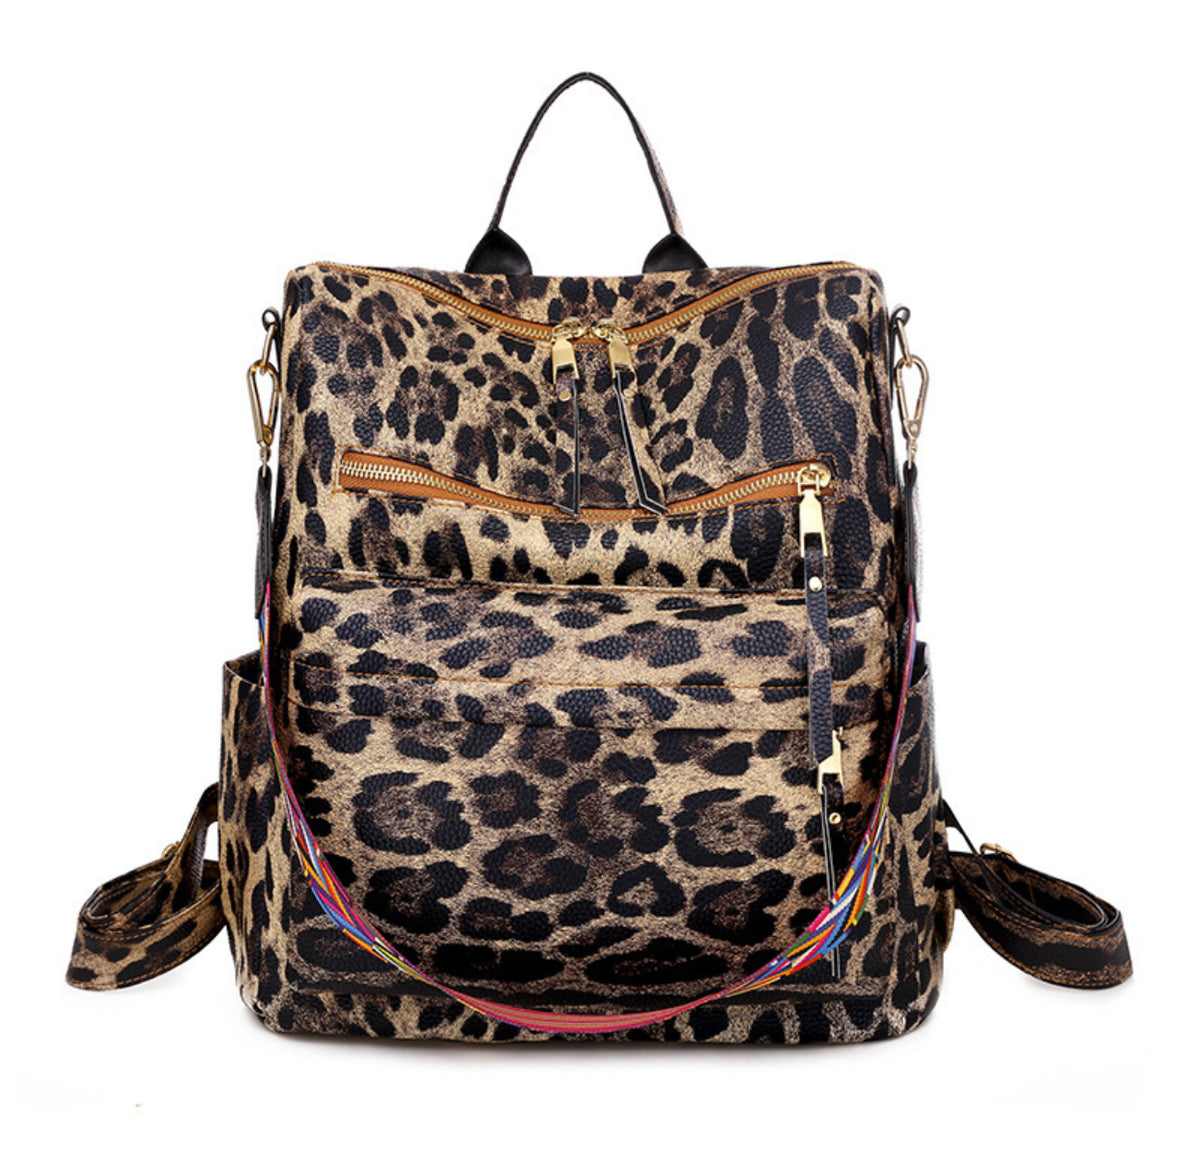 Brown Leopard Print Backpack with Colorful Strap – Ashley Sky Boutique